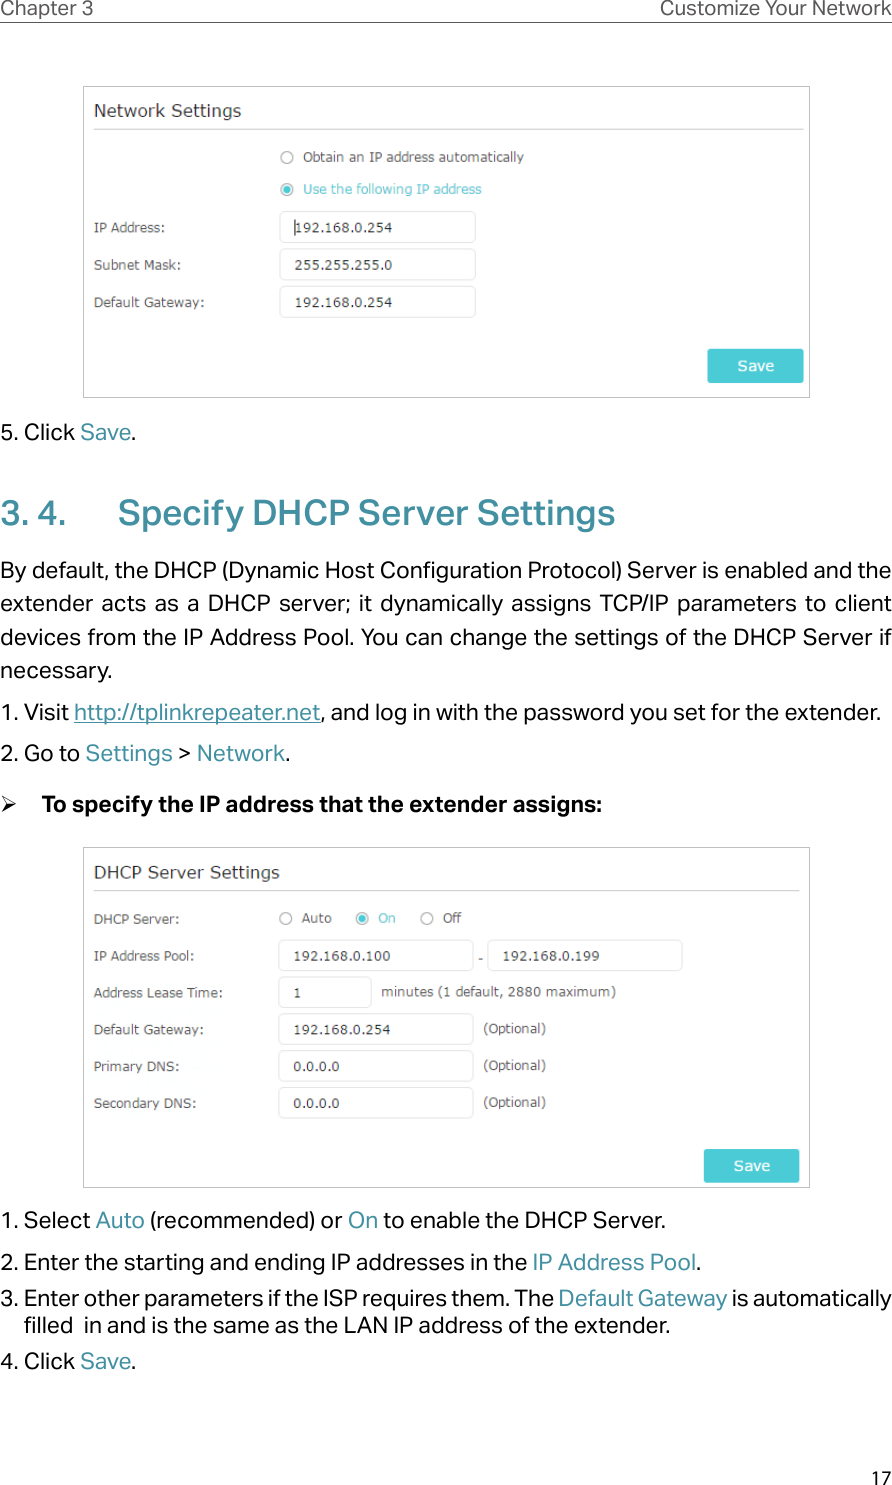 17Chapter 3 Customize Your Network5. Click Save. 3. 4.  Specify DHCP Server SettingsBy default, the DHCP (Dynamic Host Configuration Protocol) Server is enabled and the extender acts as a DHCP server; it dynamically assigns TCP/IP parameters to client devices from the IP Address Pool. You can change the settings of the DHCP Server if necessary.1. Visit http://tplinkrepeater.net, and log in with the password you set for the extender.2. Go to Settings &gt; Network. ¾To specify the IP address that the extender assigns:1. Select Auto (recommended) or On to enable the DHCP Server.2. Enter the starting and ending IP addresses in the IP Address Pool.3. Enter other parameters if the ISP requires them. The Default Gateway is automatically filled  in and is the same as the LAN IP address of the extender.4. Click Save.